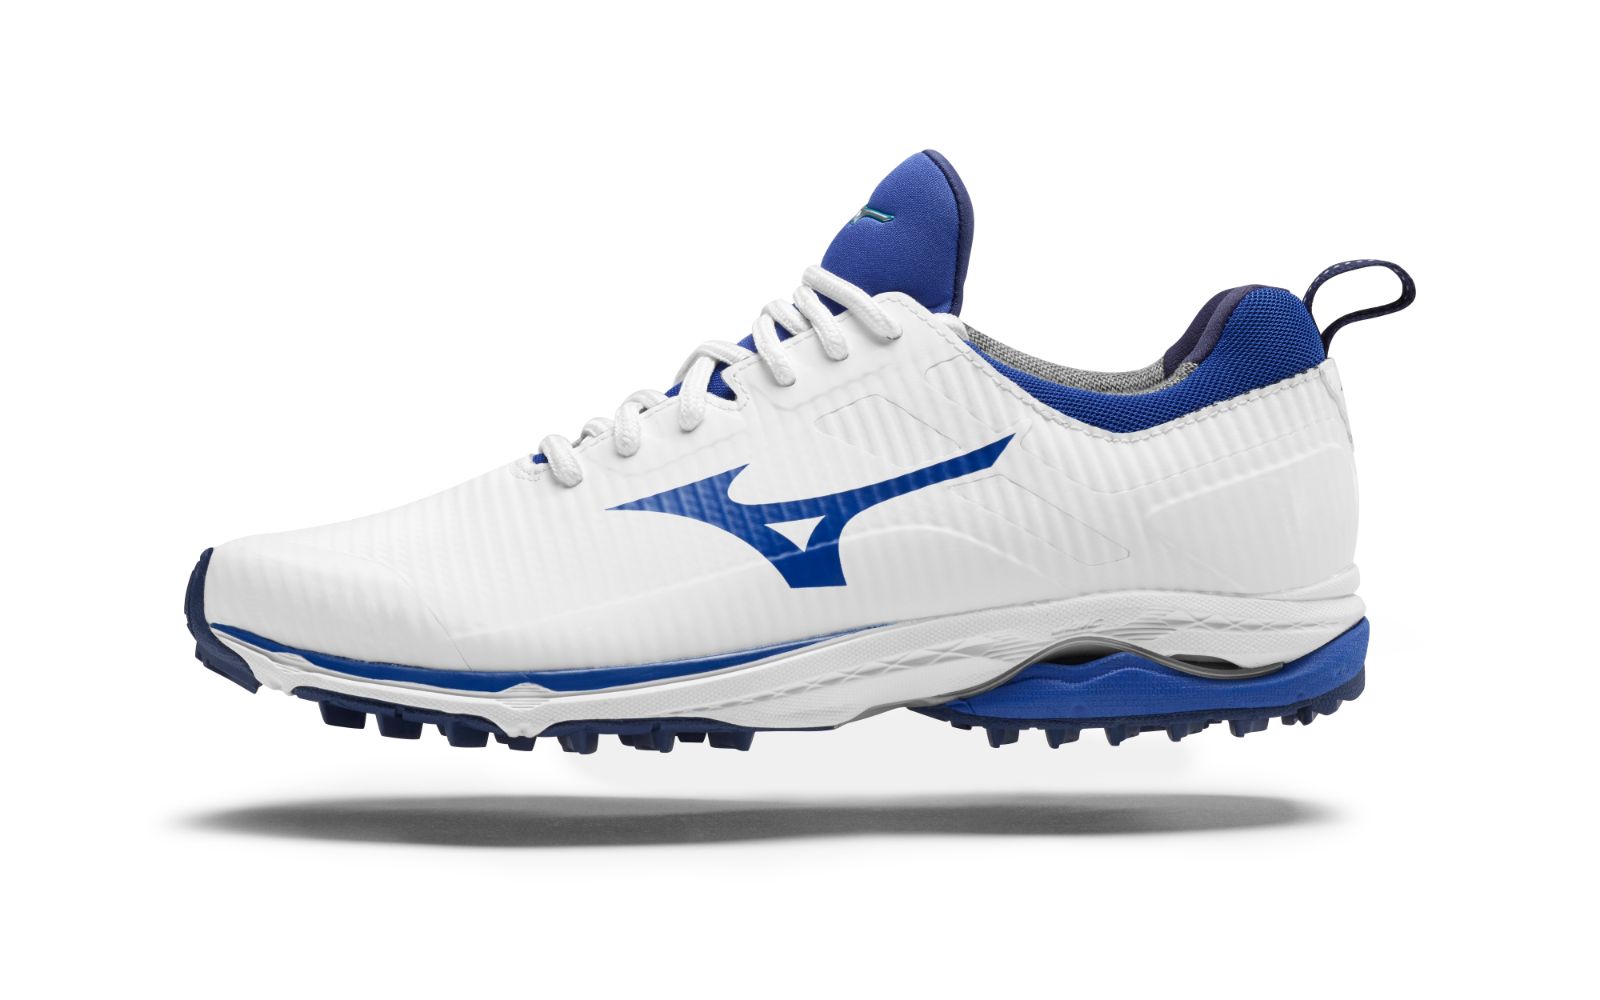 Mizuno Wave Cadence Spikeless 2020 Golf Shoes White/Surf